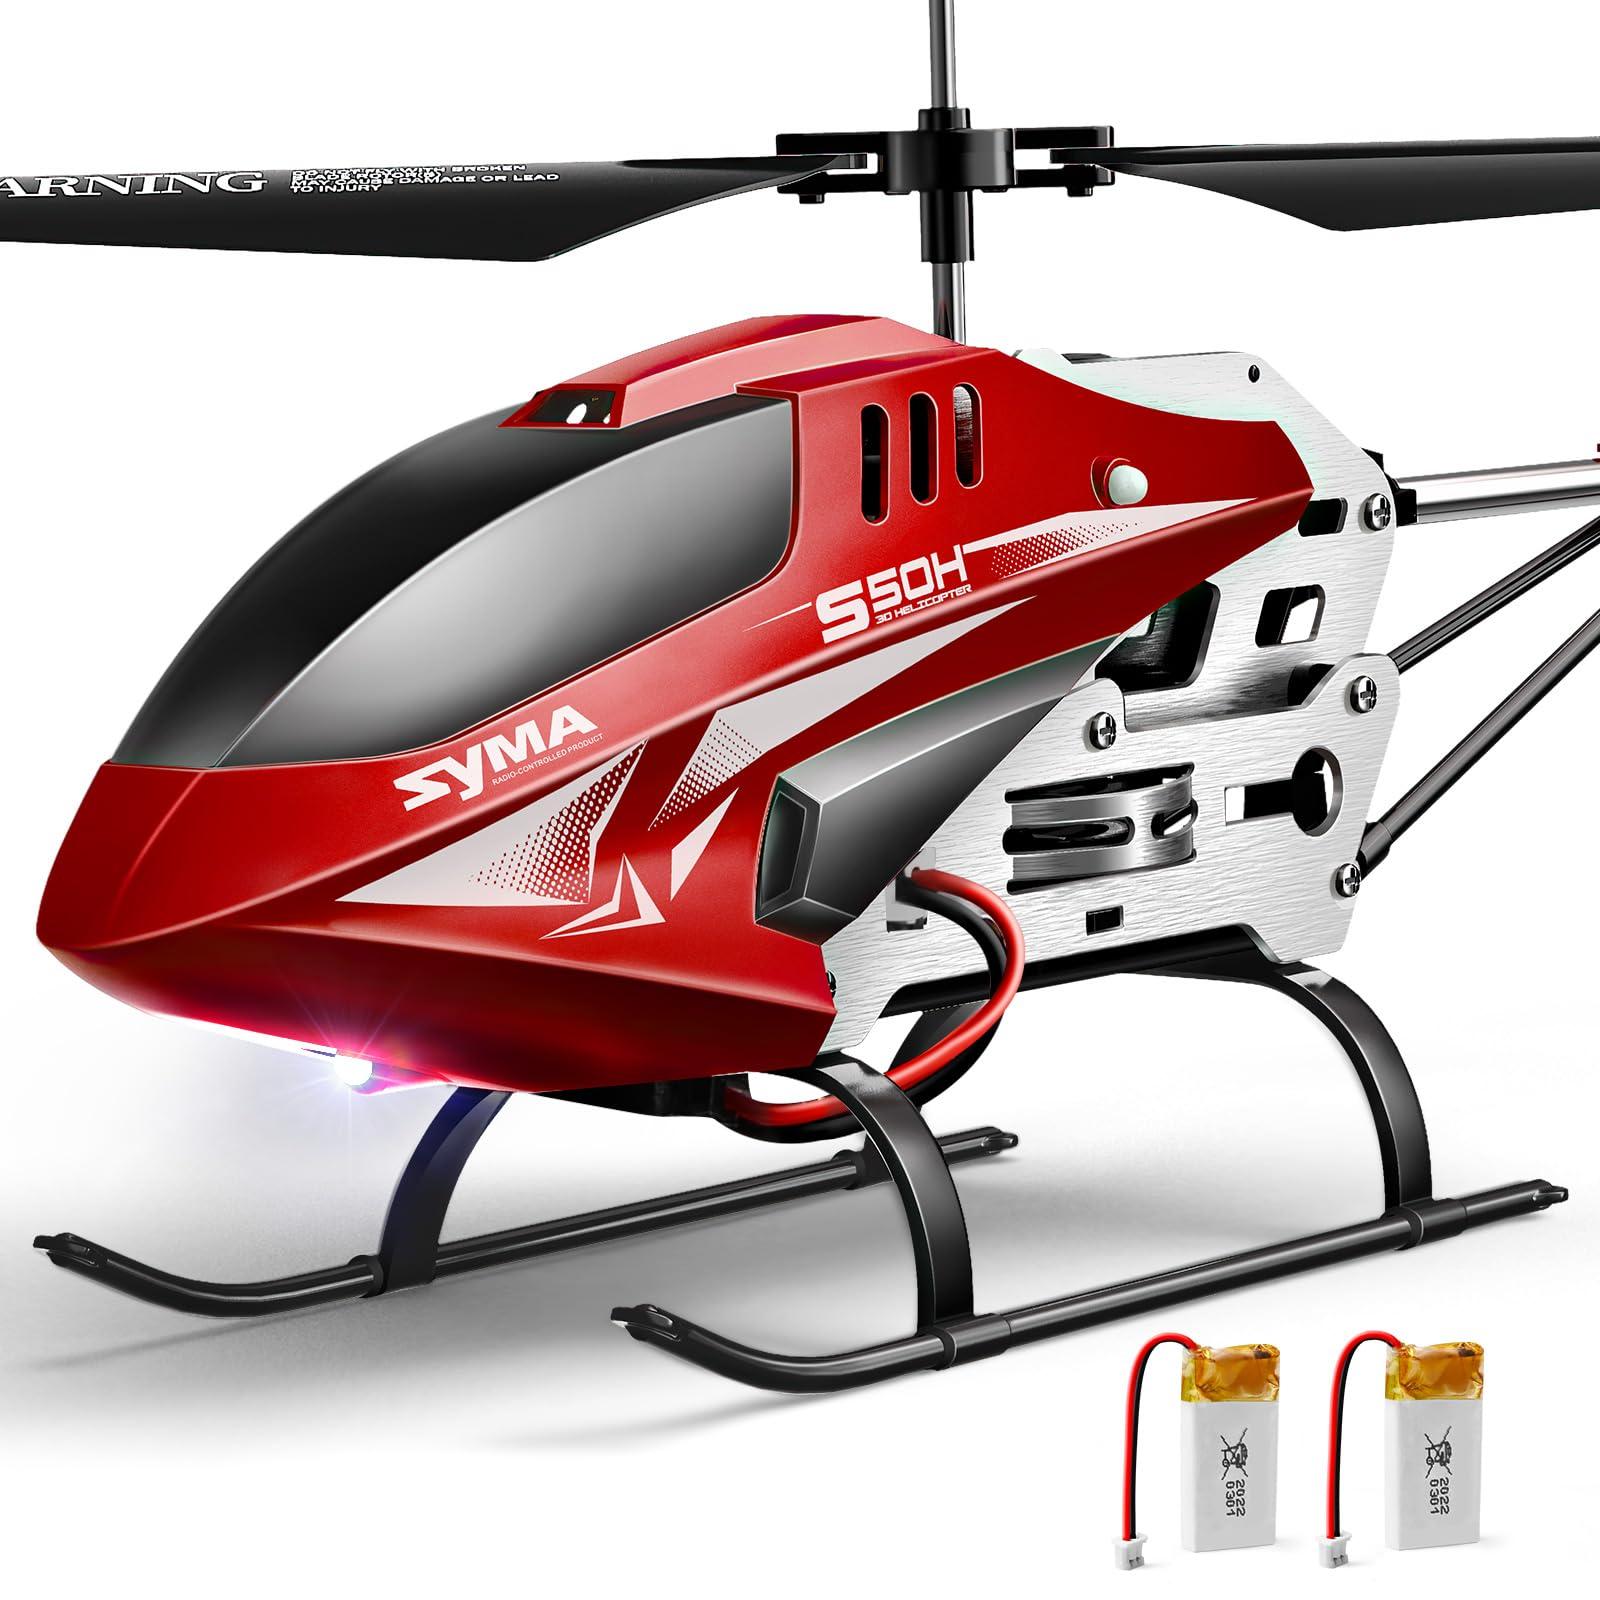 Syma S37 Rc Helicopter:  Key Features of the Syma S37 RC Helicopter